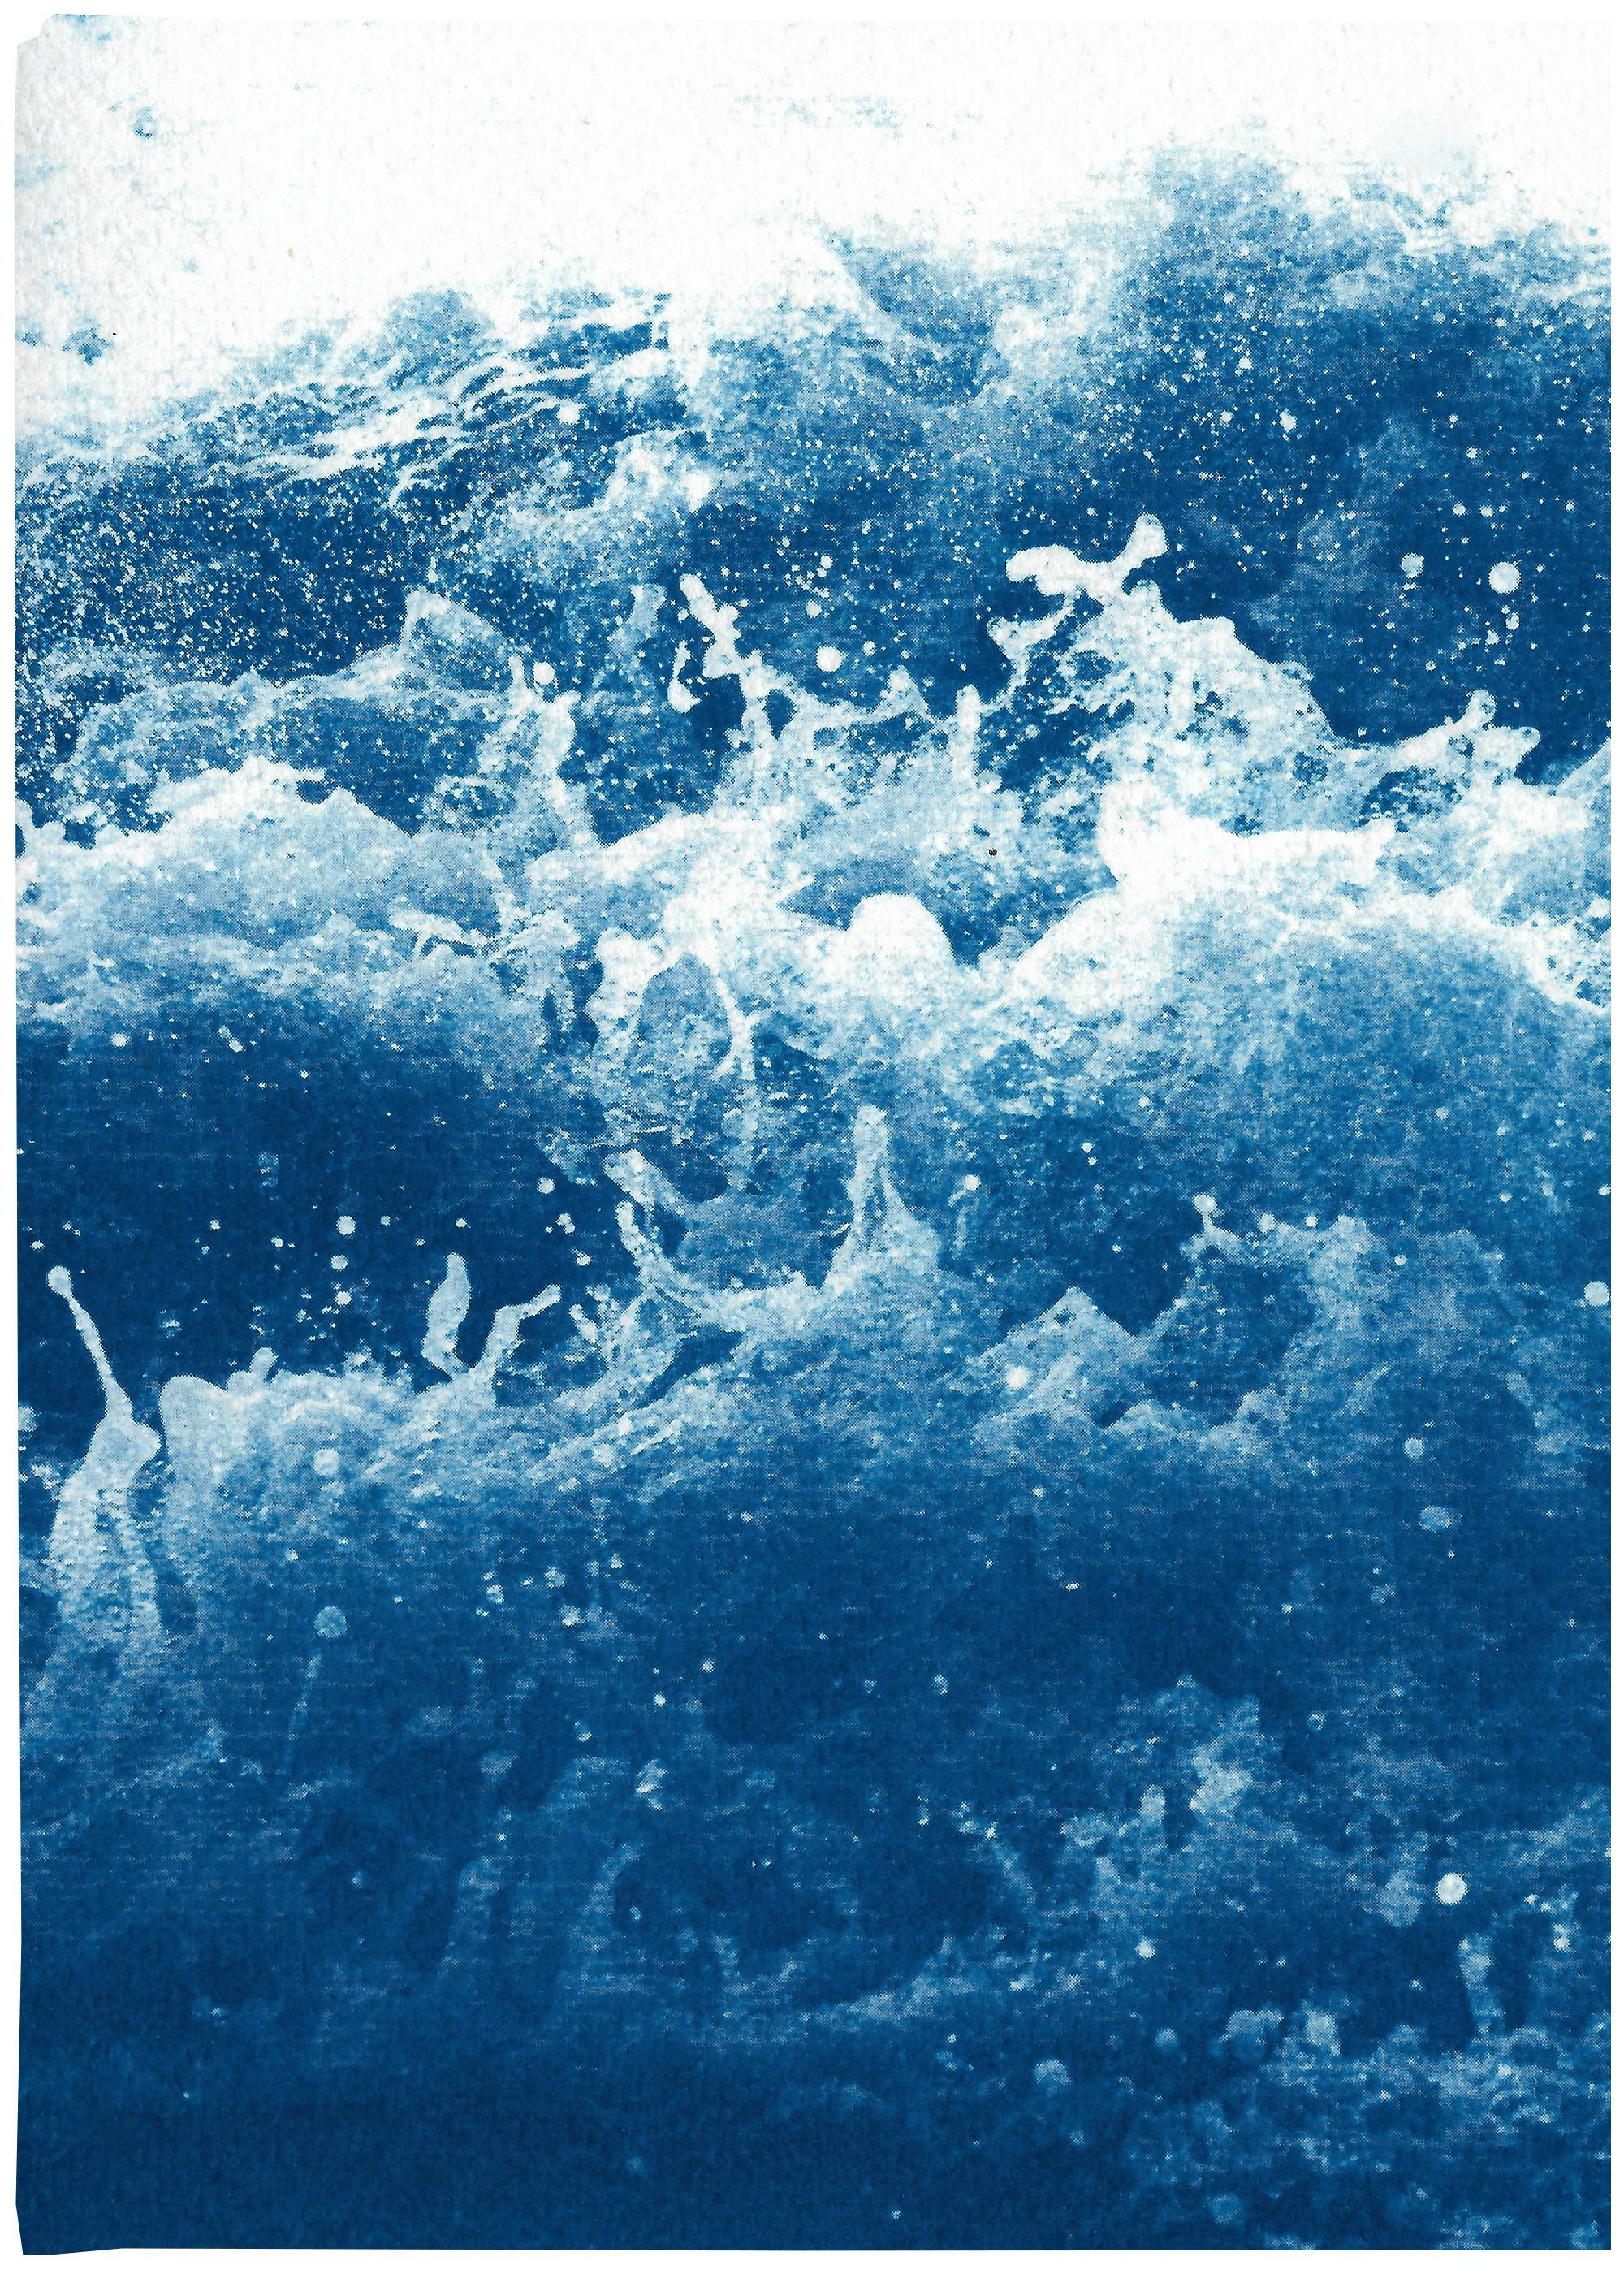 Tempestuous Tidal in Blue, Stormy Seascape Diptych, Cyanotype Print, Maker, Blue 2